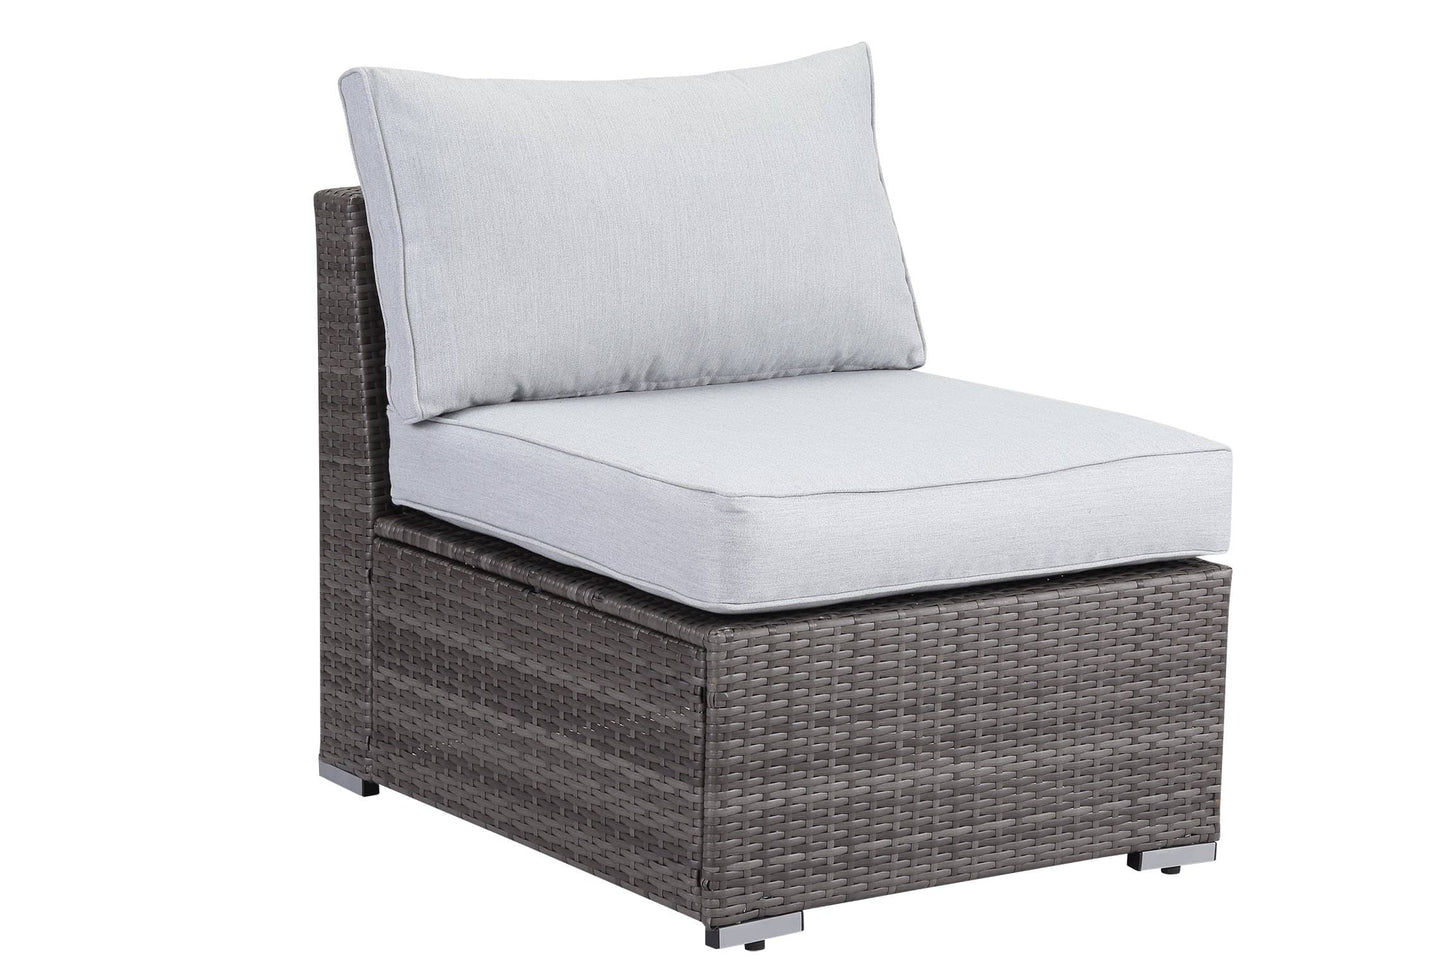 Staffora Evoke 6 Piece All Weather Wicker Sofa Seating Group with Cushions and Coffee Table - Grey